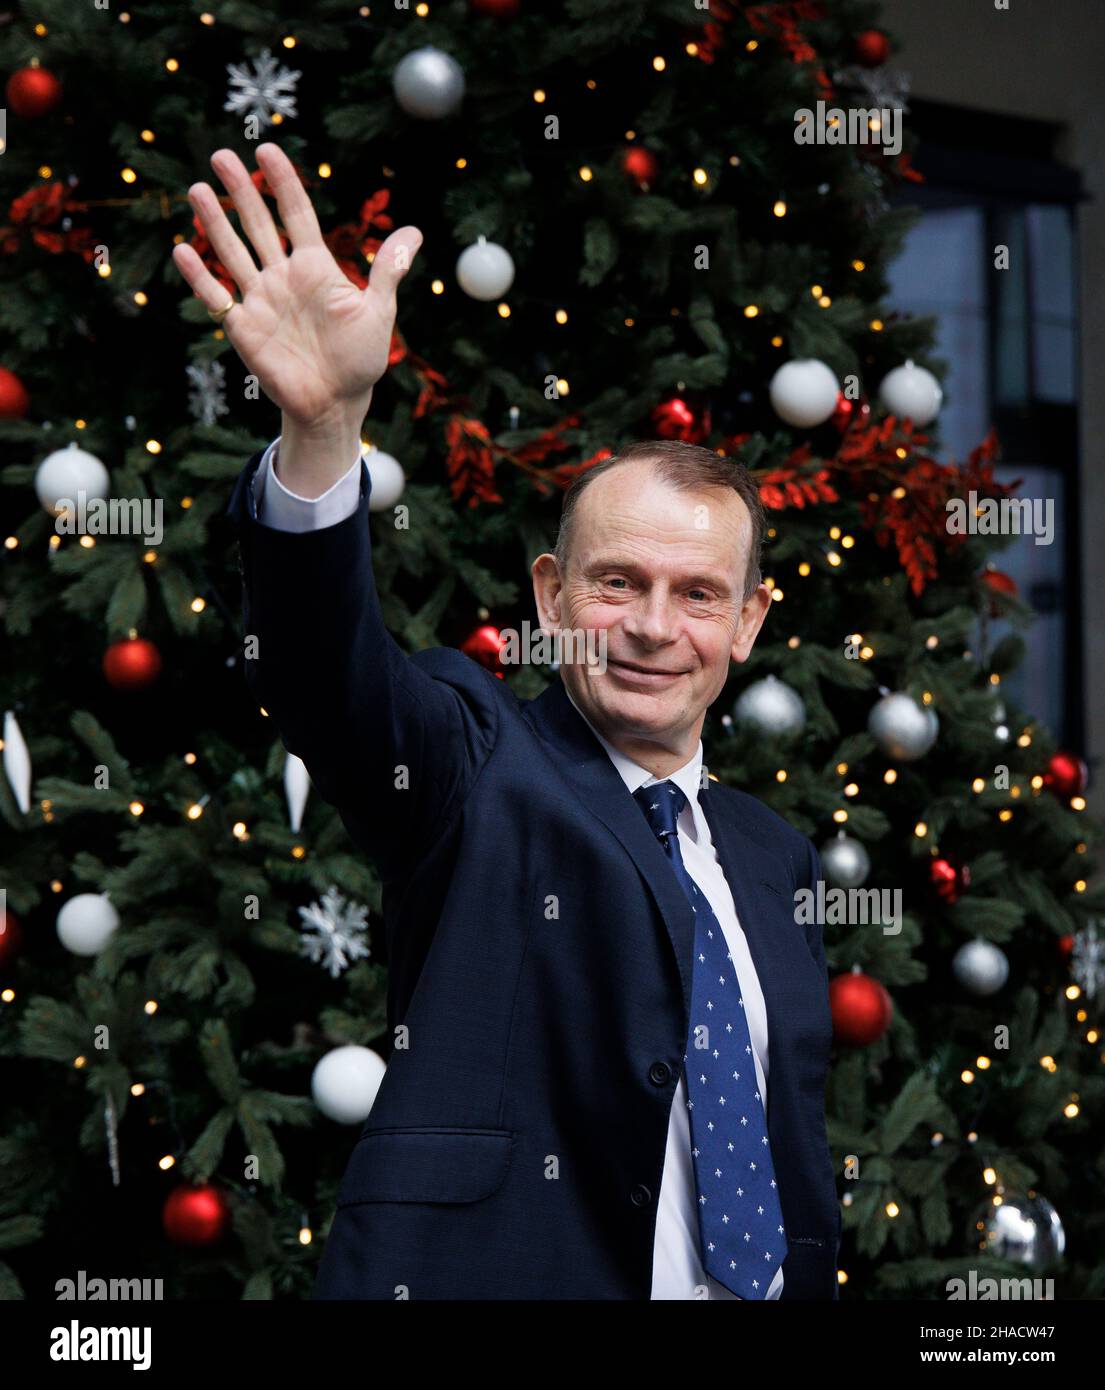 London, UK. 12th Dec, 2021. Andrew Marr waves as he leaves after presenting his show, The Andrew Marr Show. He is leaving the BBC after 21 years. He will present his last Andrew Marr Show on December 19th. Credit: Tommy London/Alamy Live News Stock Photo